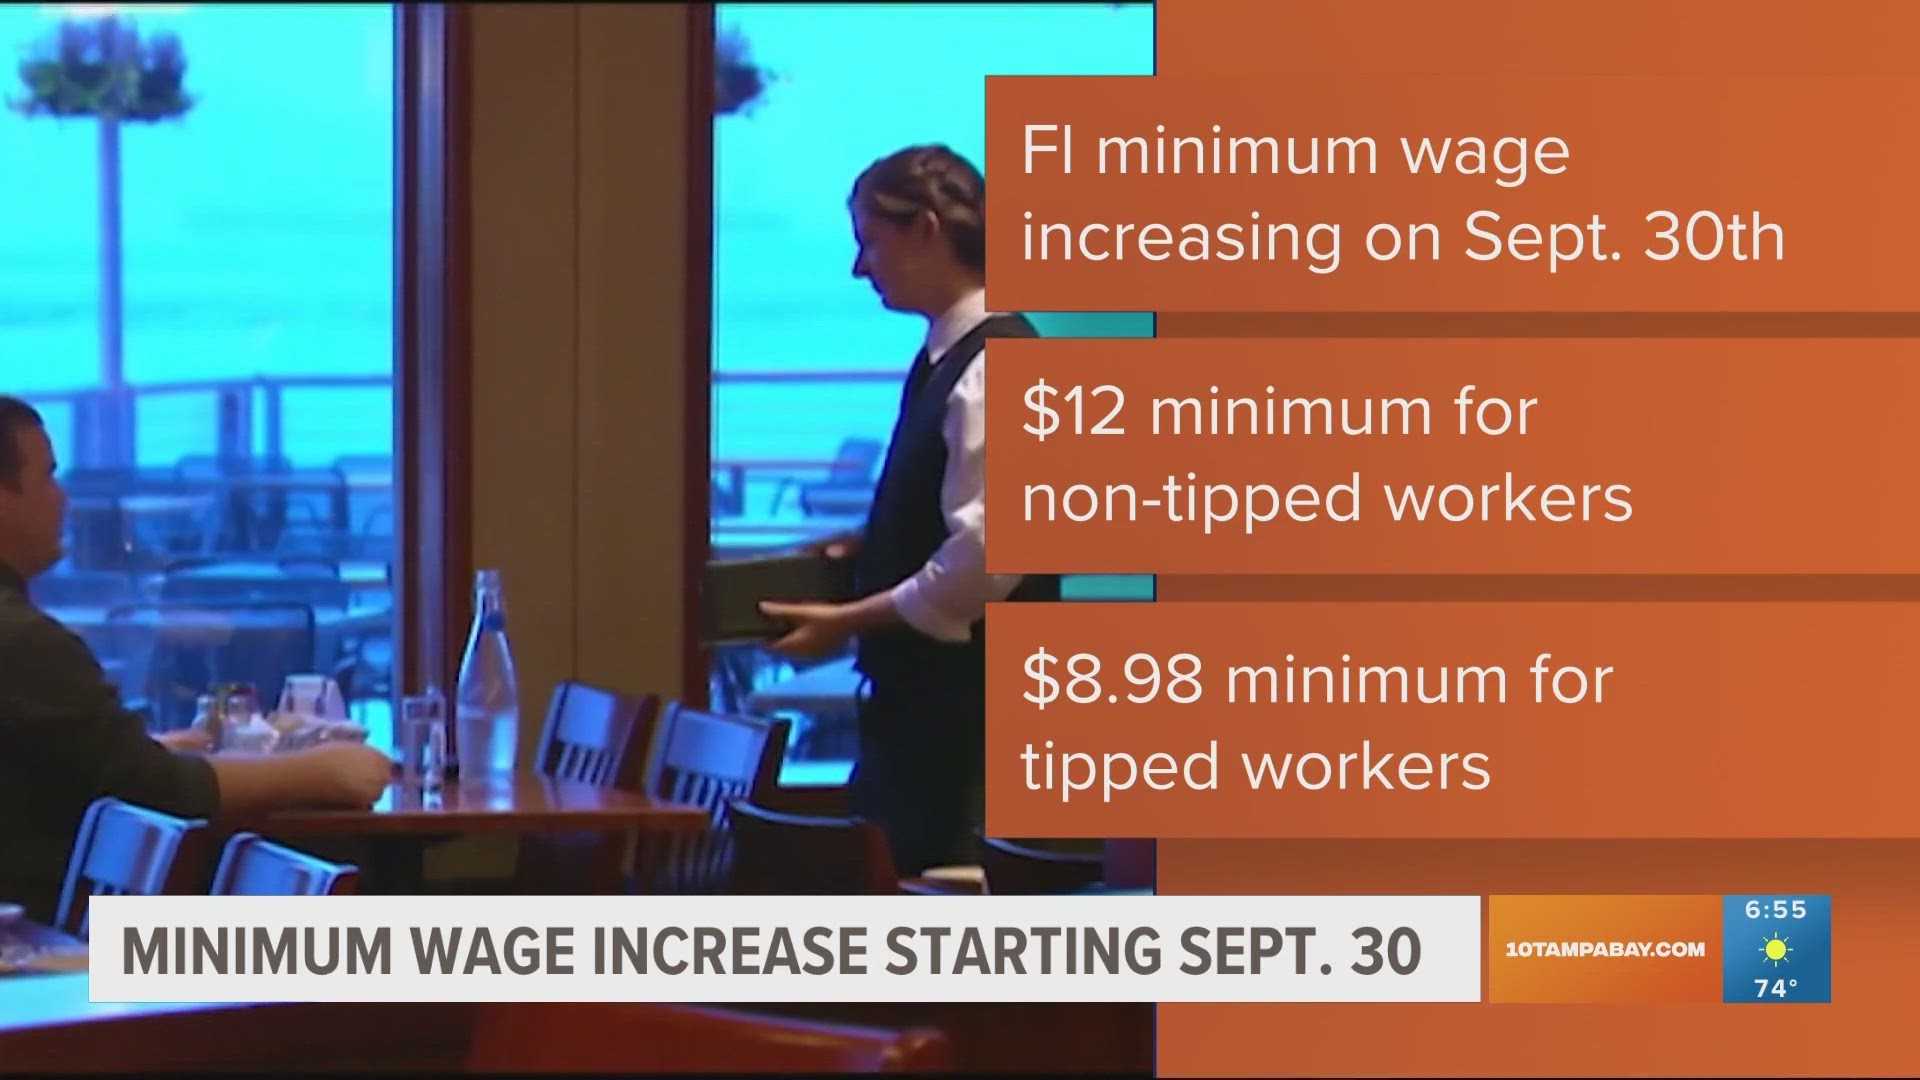 Thanks to an amendment approved by voters in 2020, minimum wages for tipped and non-tipped workers will increase next week.